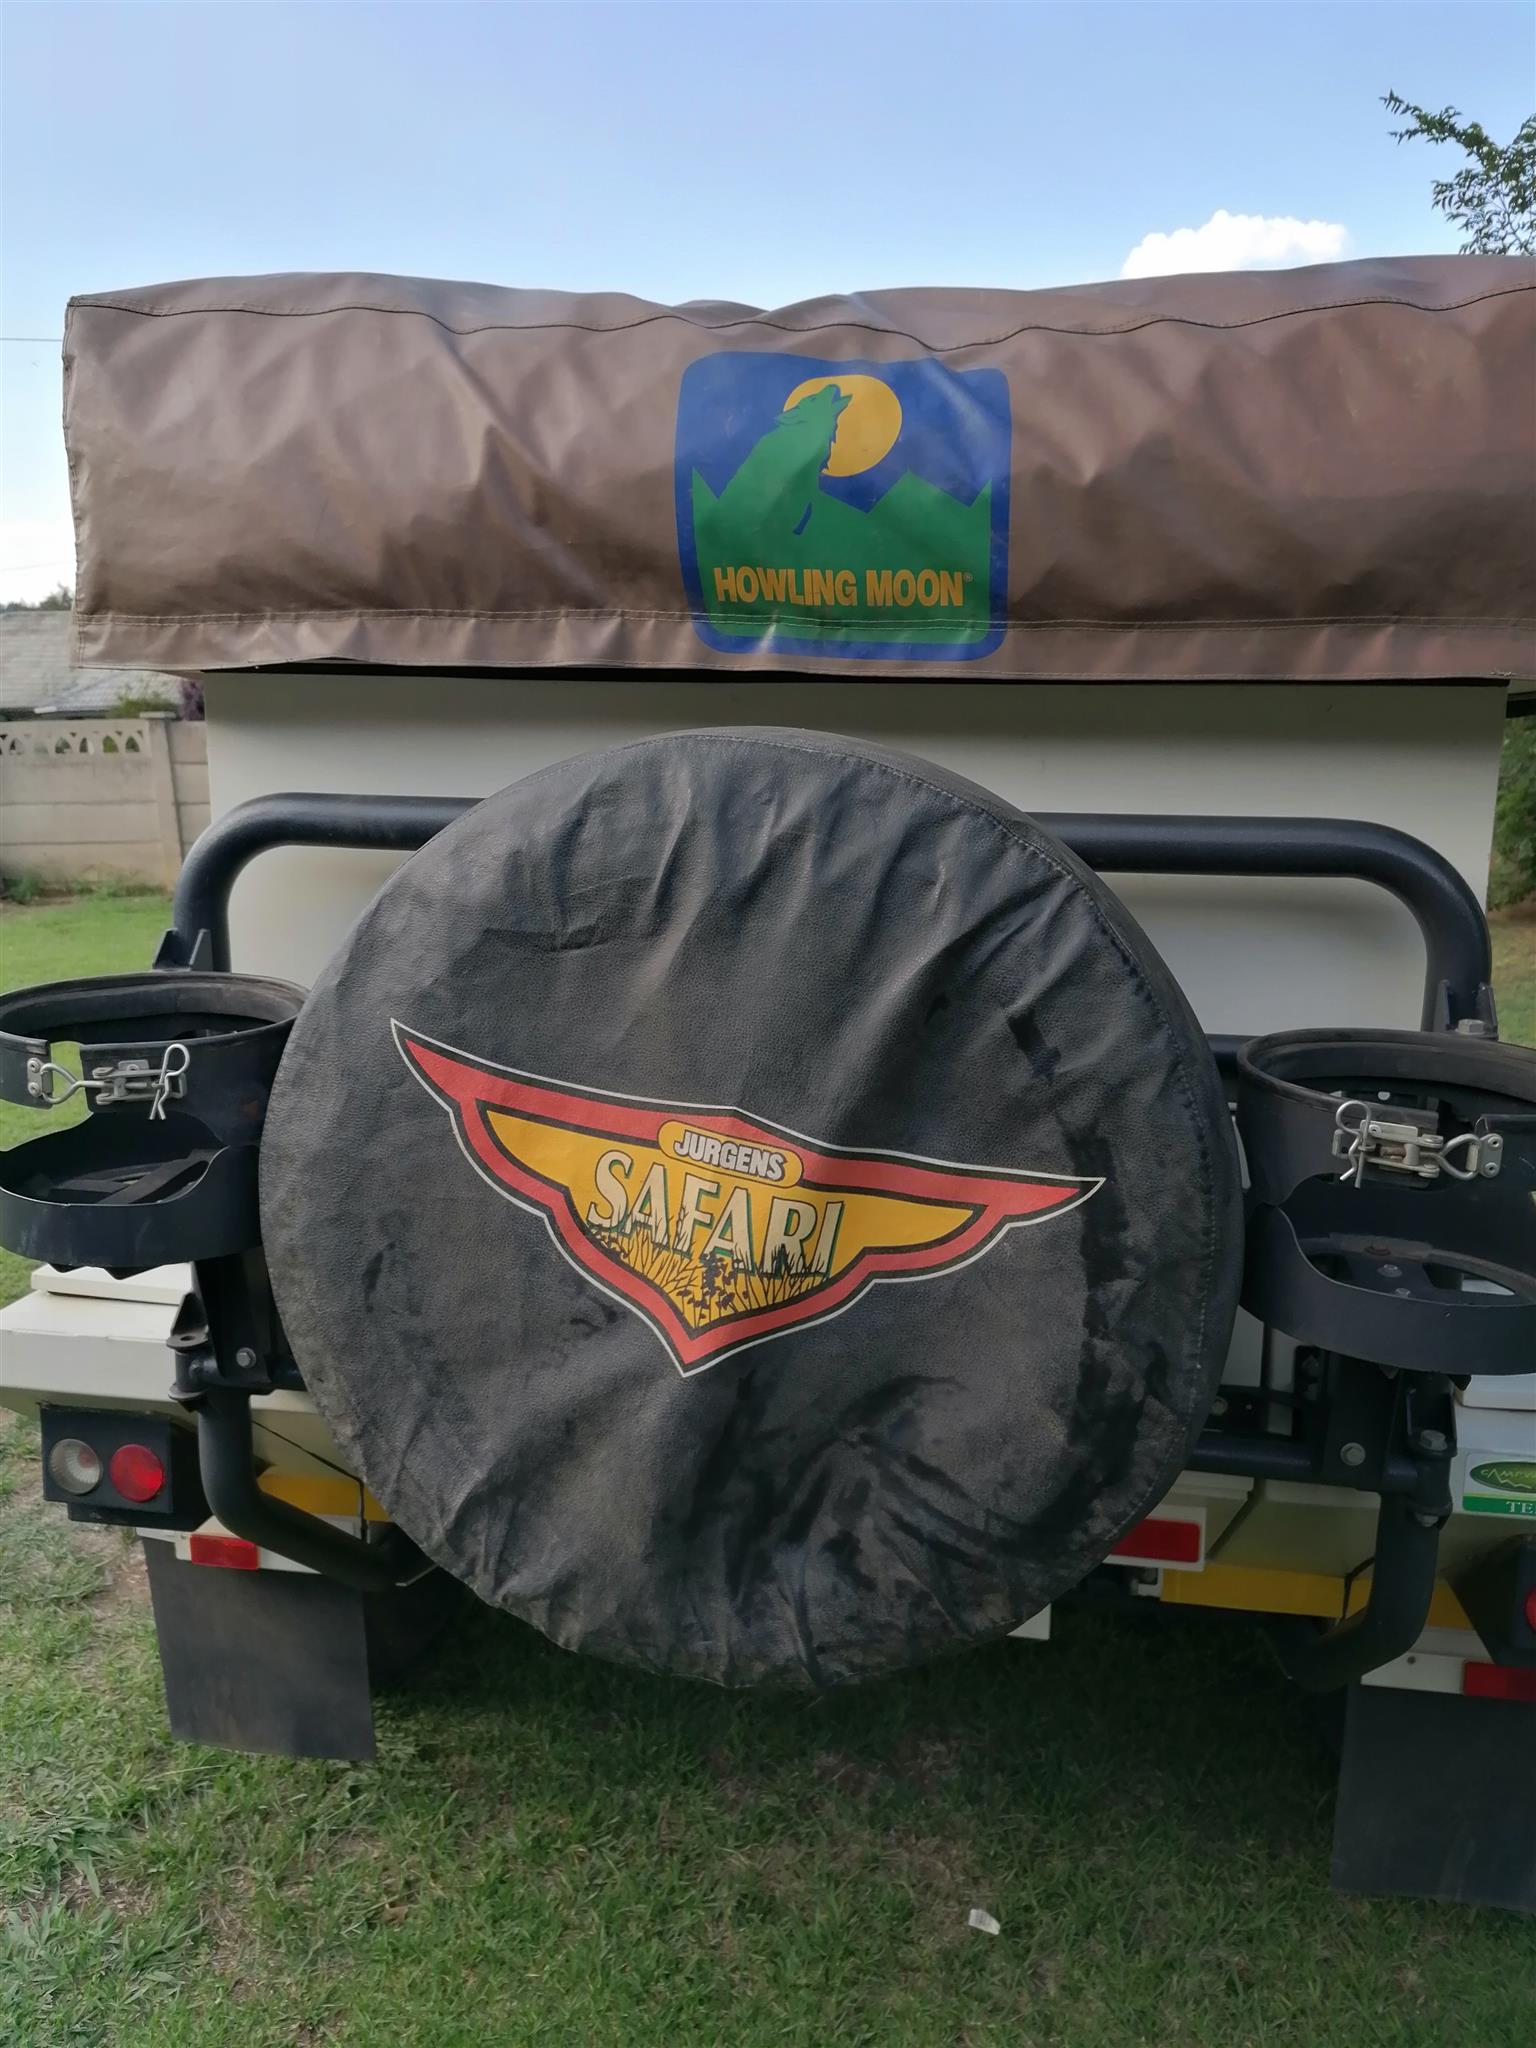 XT140 in excellent condition with Howling moon tent, complete with side panels.